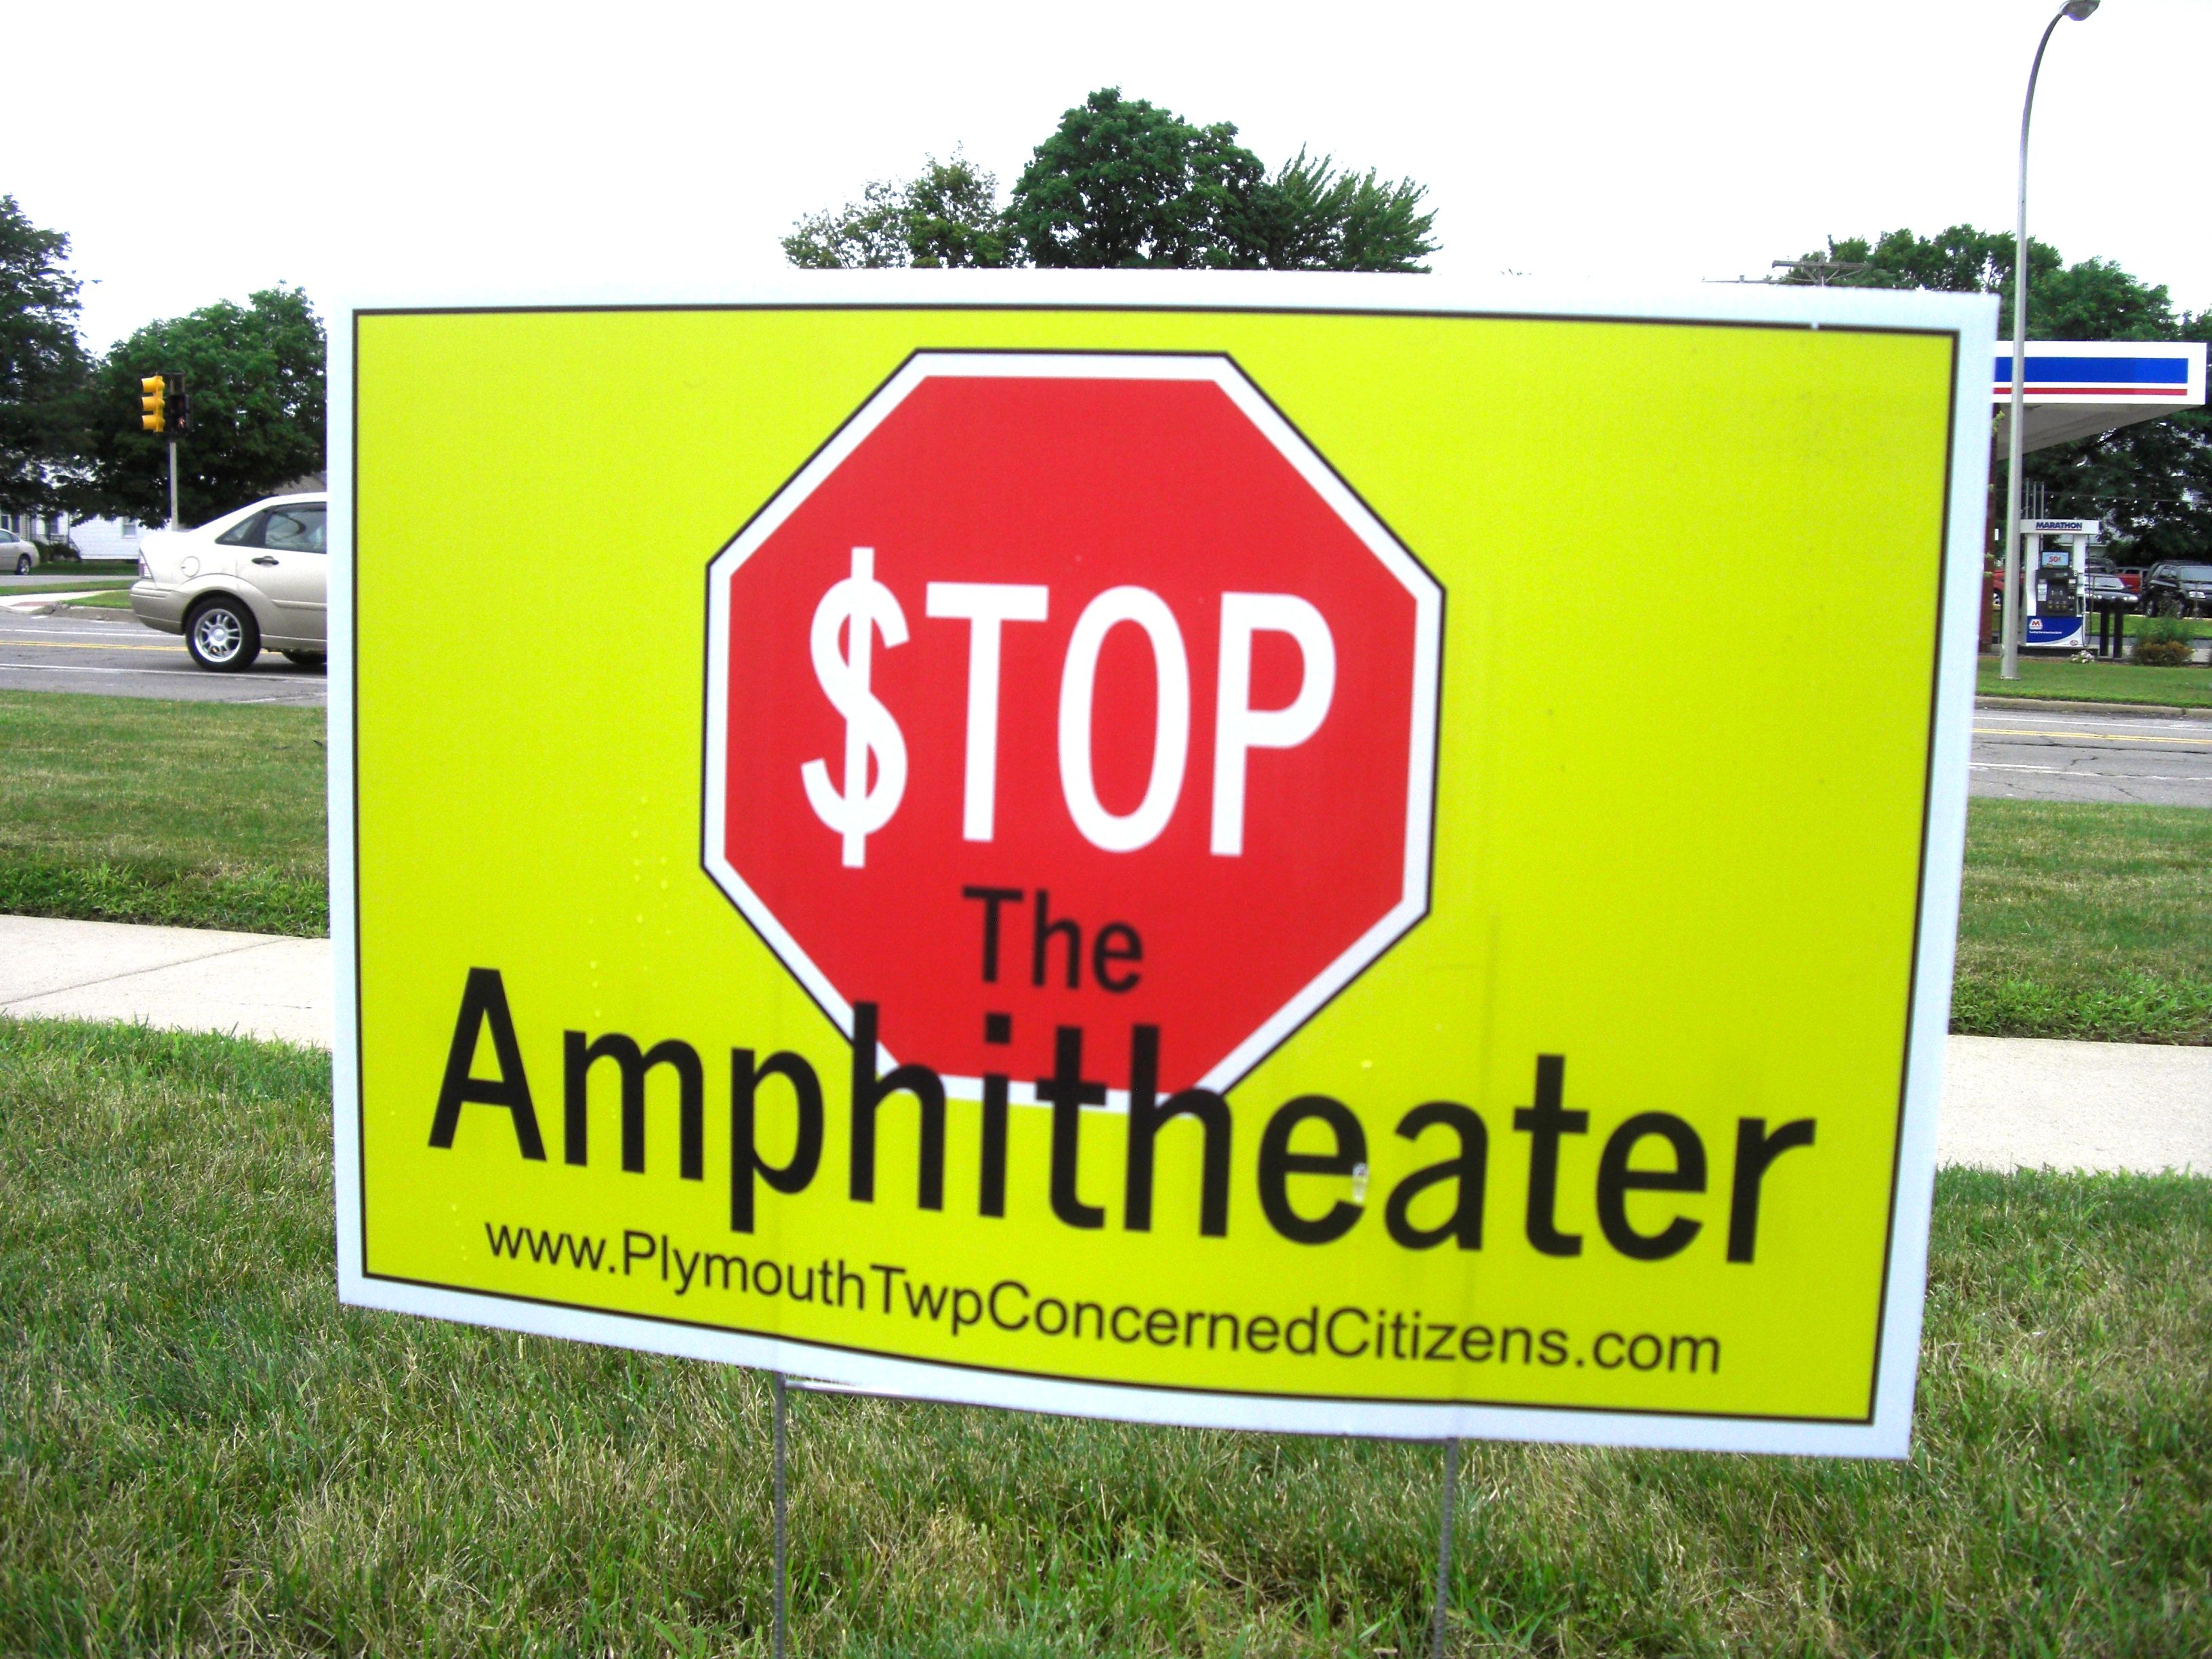 Amphitheater Signs